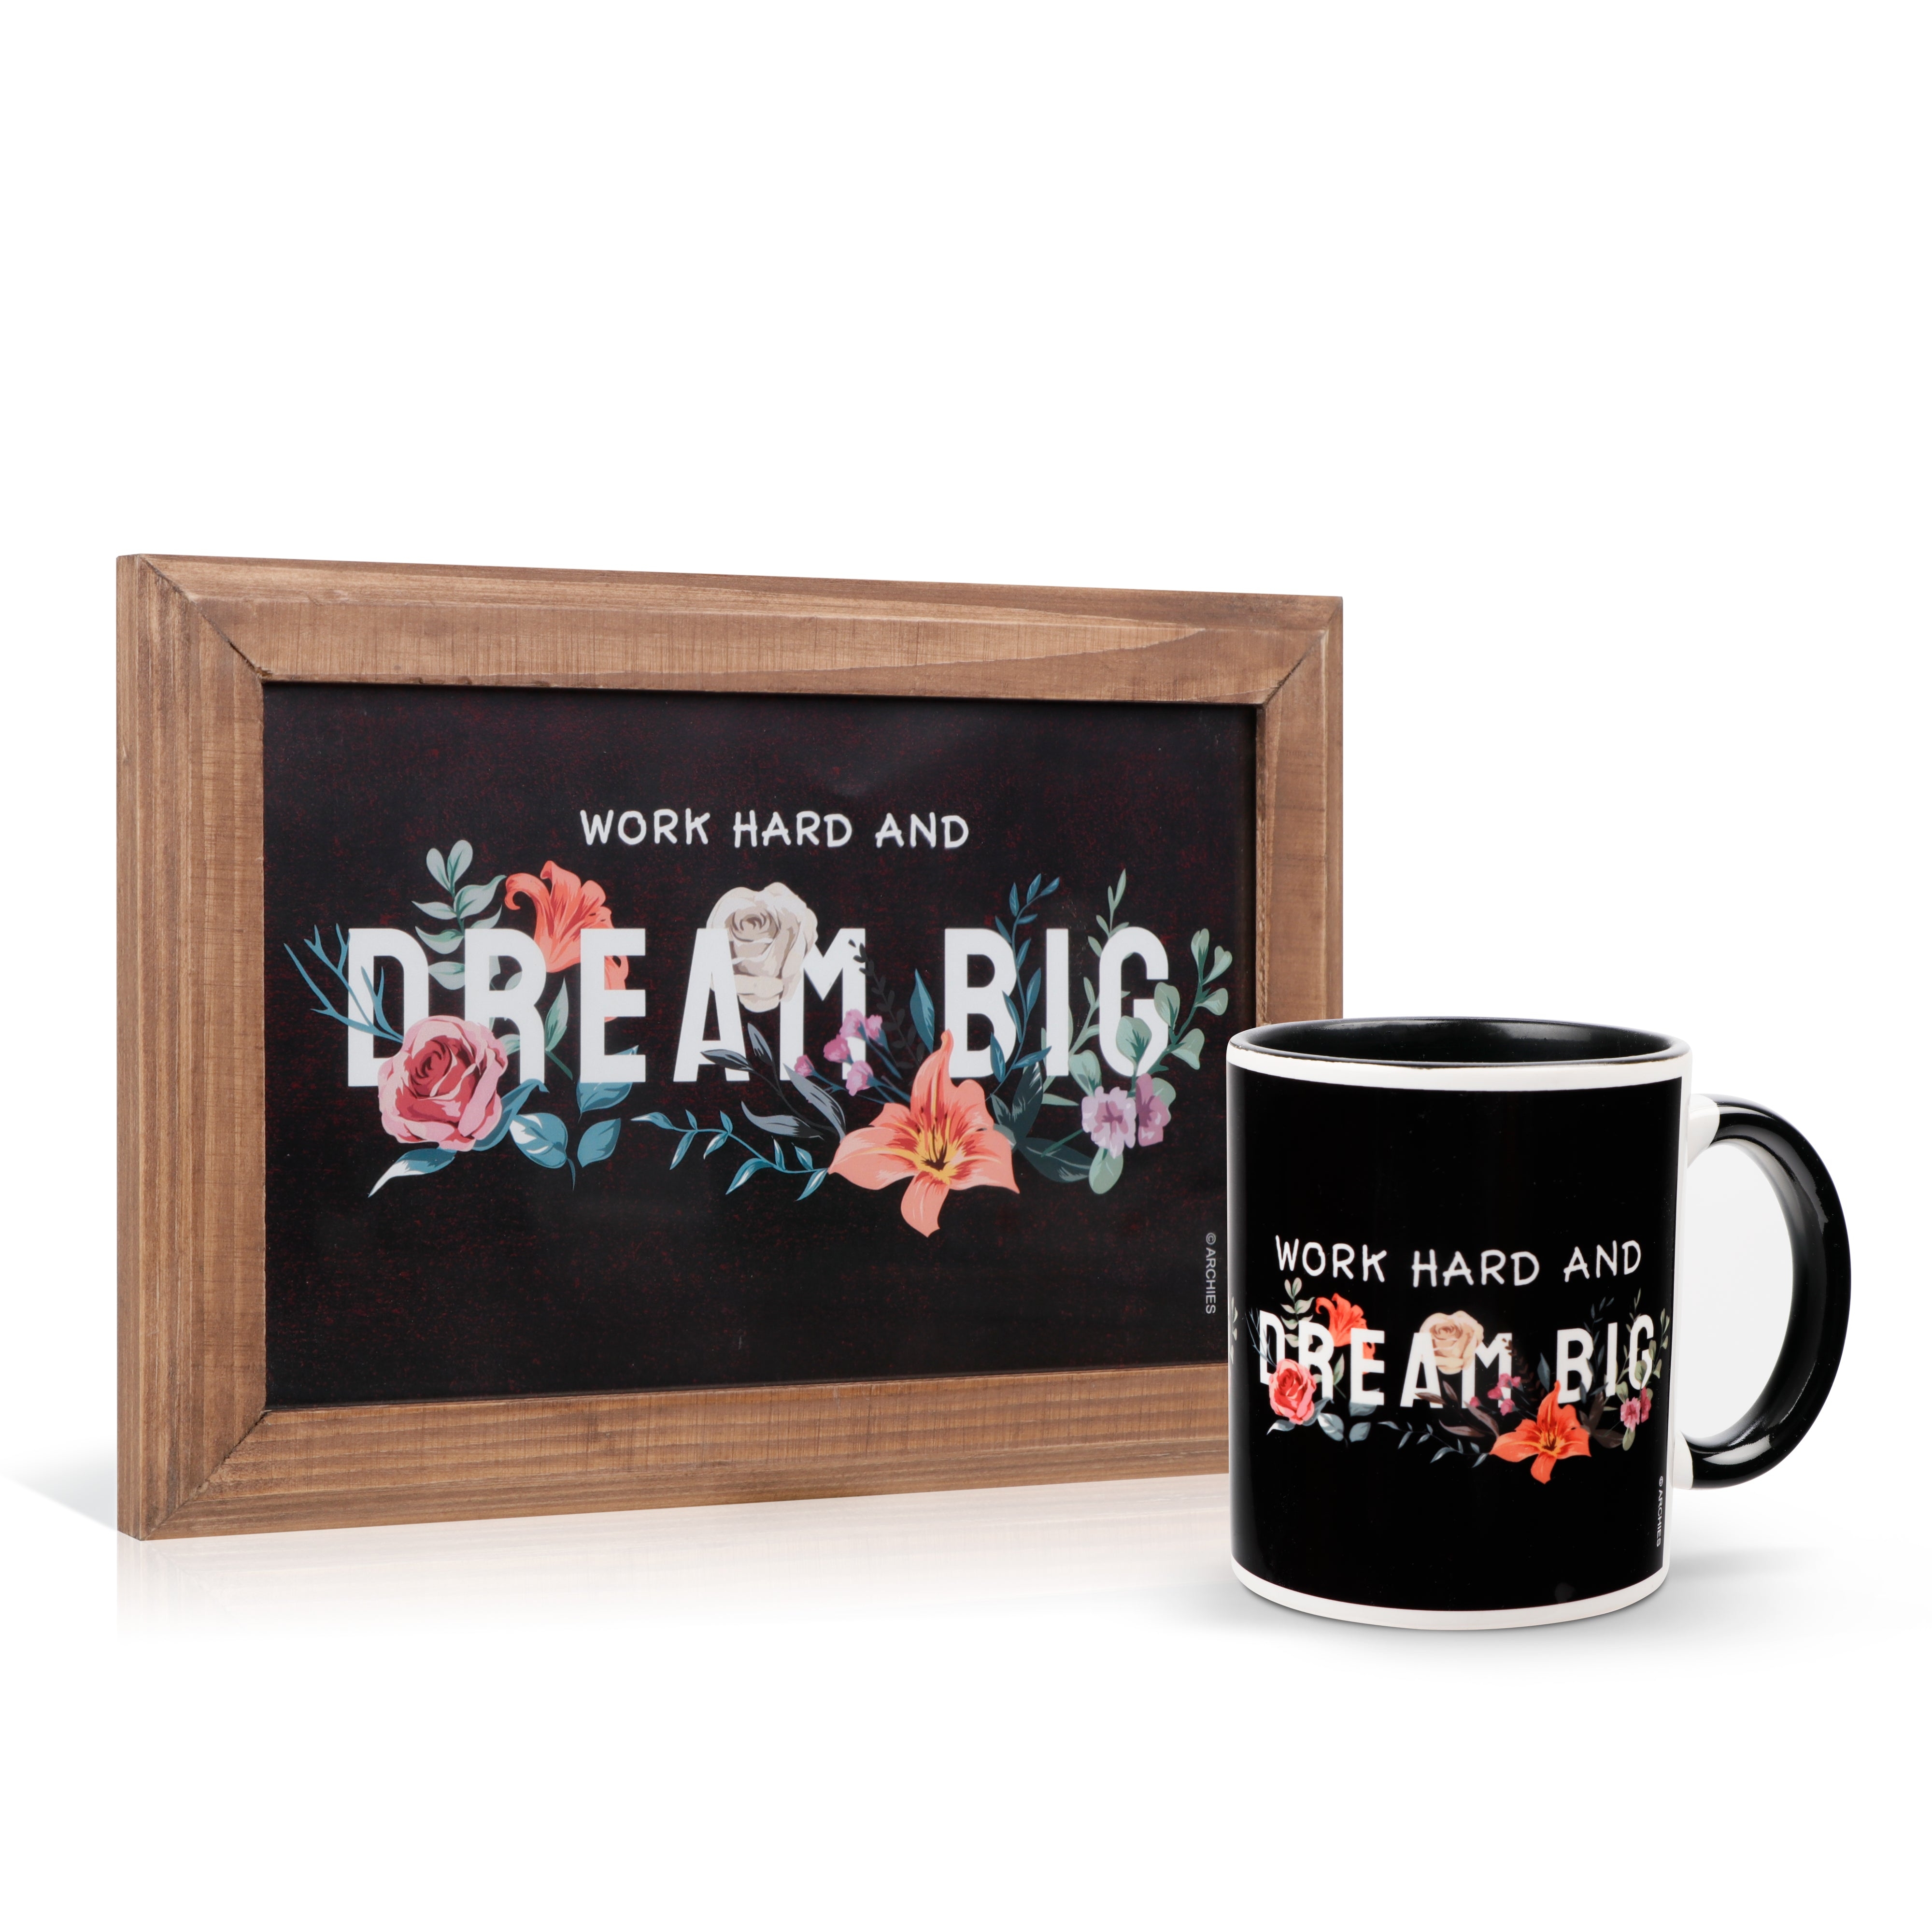 Archies KEEP SAKE Combo Gift with Ceramic Mug and Elevated Initial Quotatio- DREAM BIG